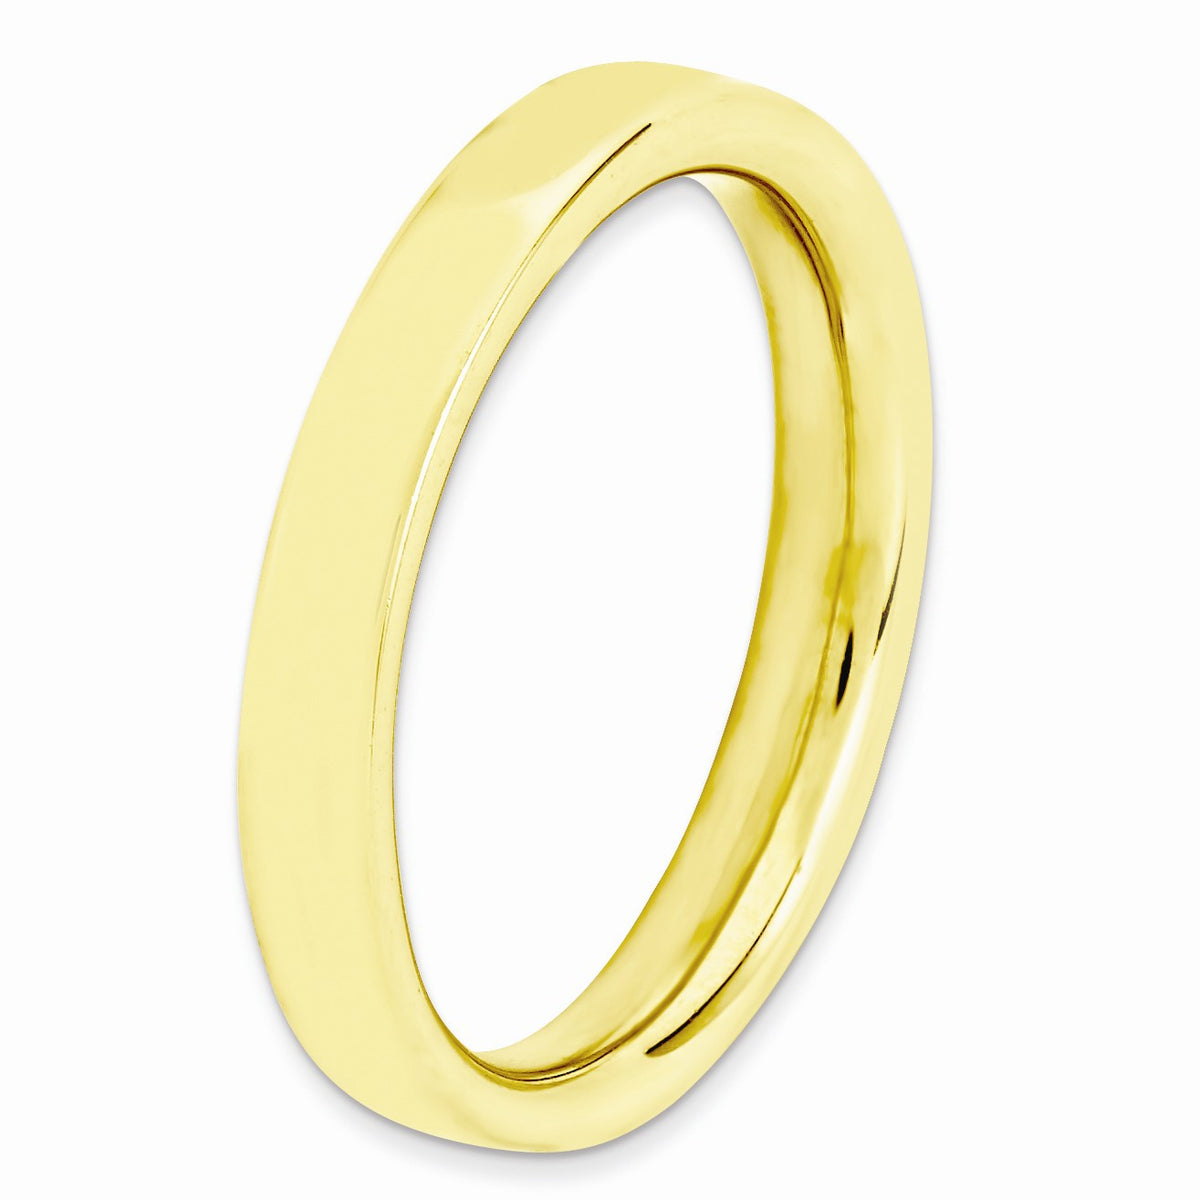 Alternate view of the 14k Yellow Gold Plated Sterling Silver Polished Flat 3.5mm Stack Band by The Black Bow Jewelry Co.